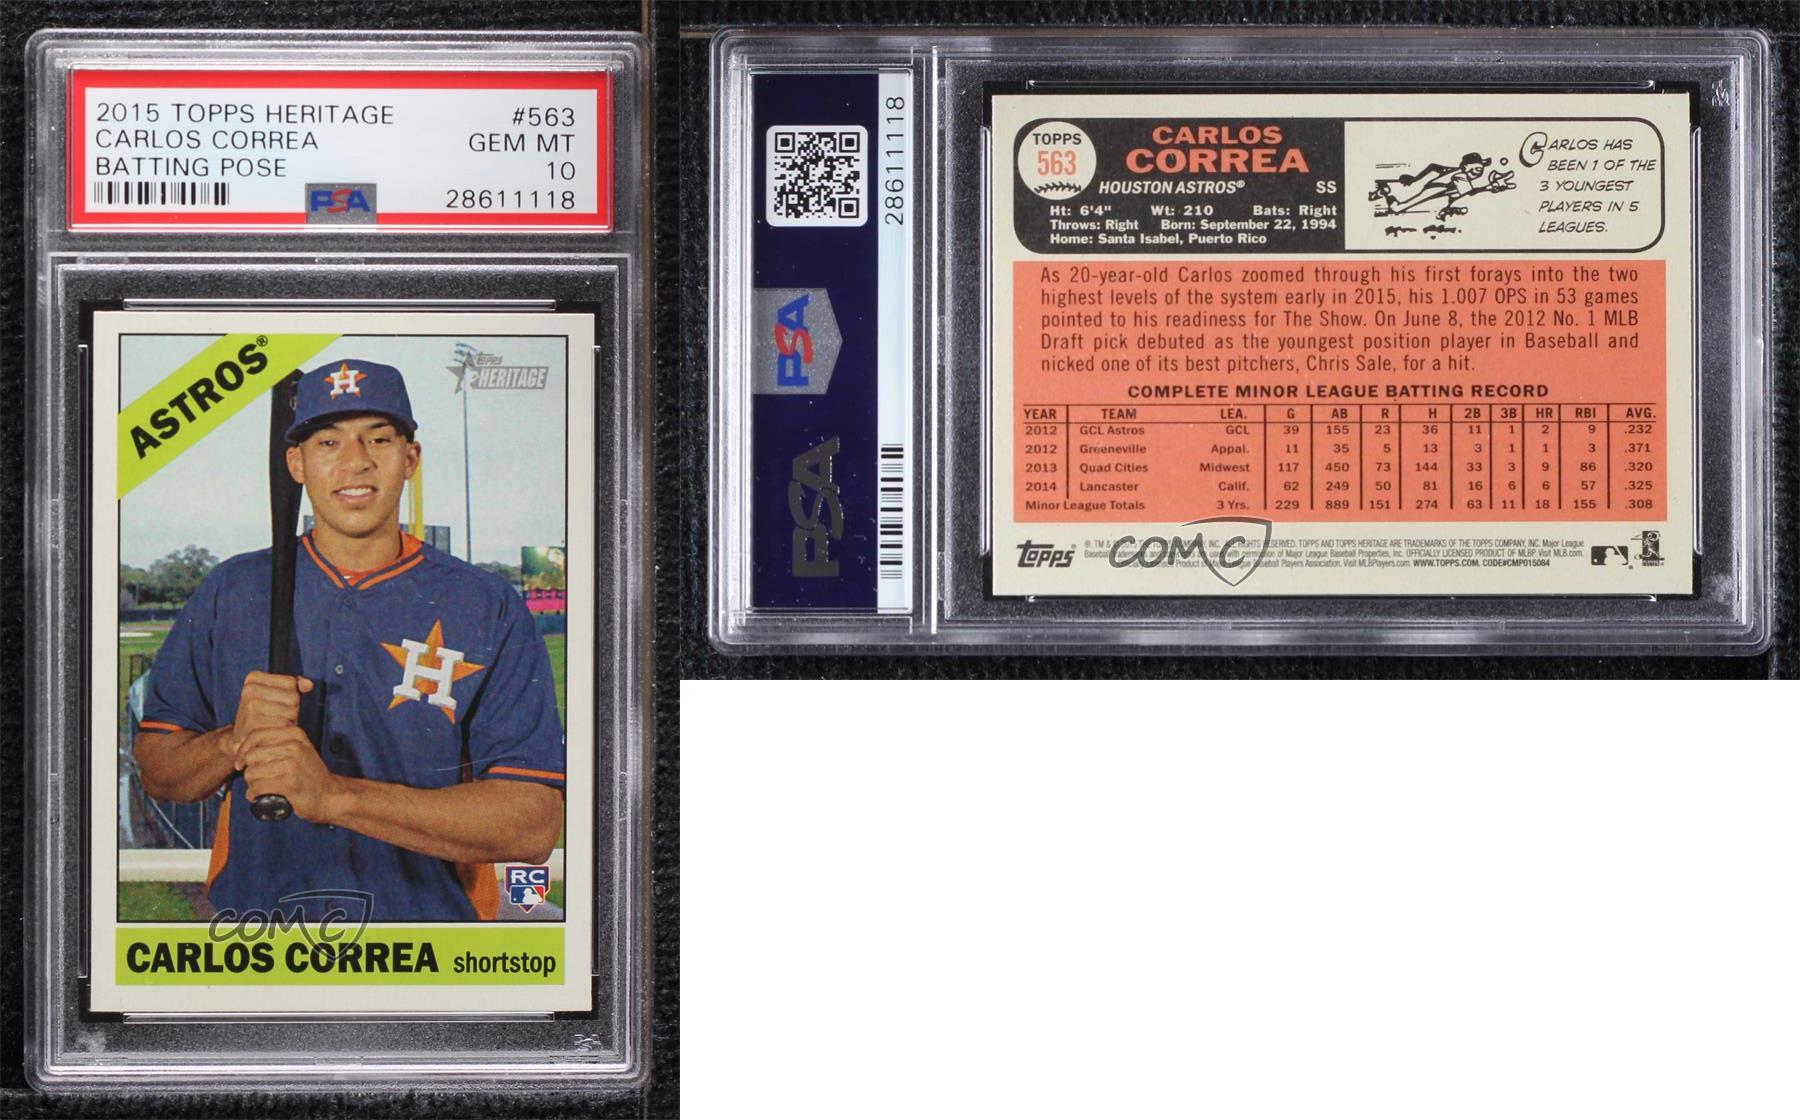 2015 Topps Heritage High Number Carlos Correa PSA 10 